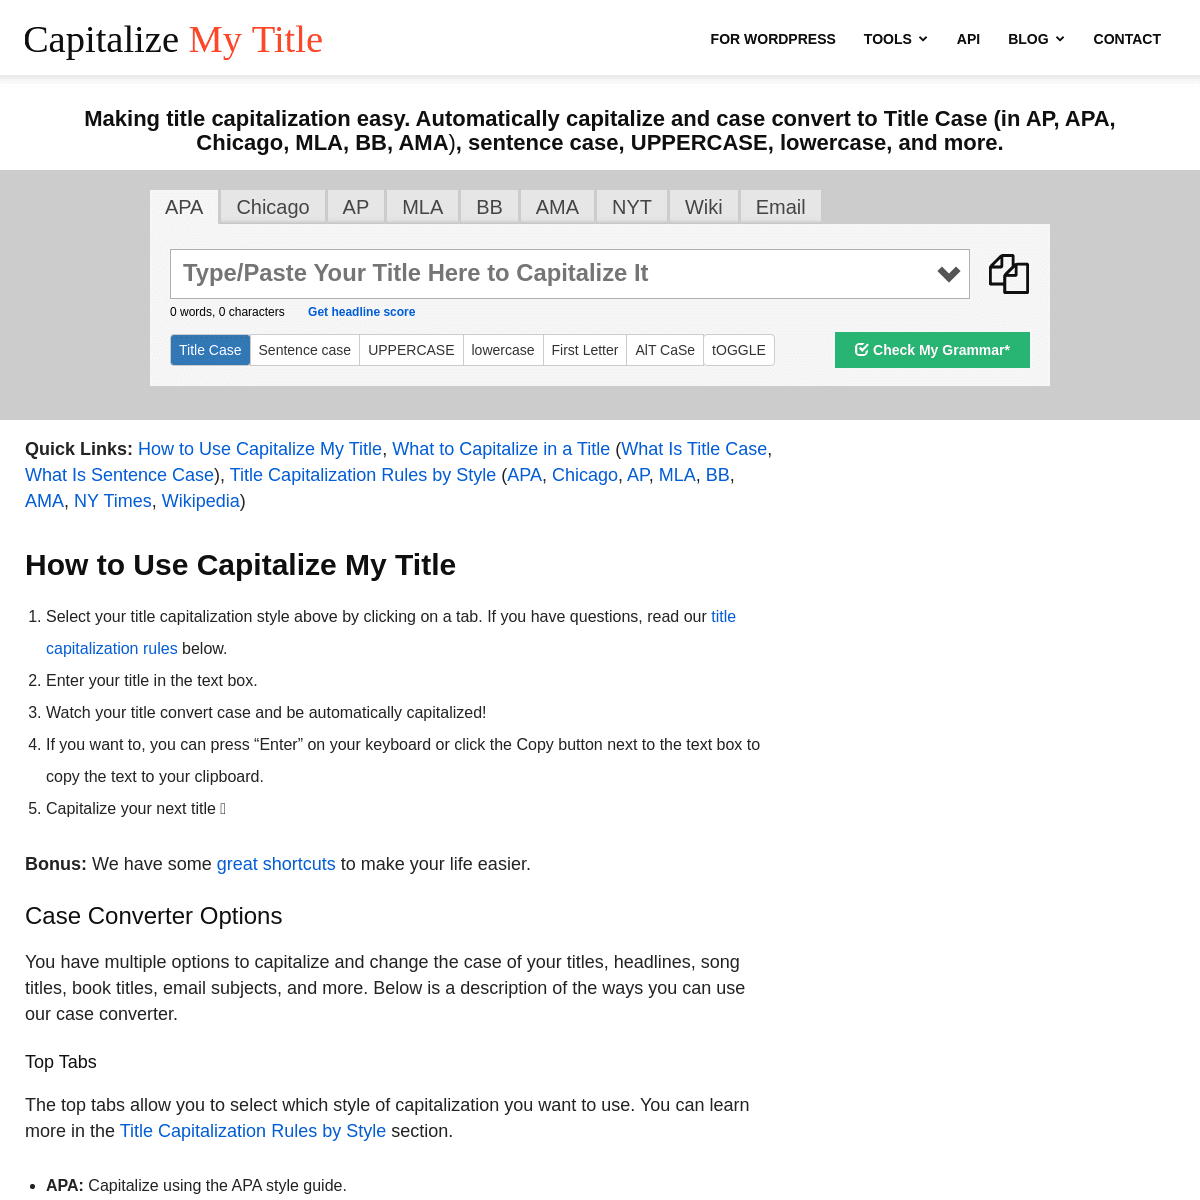 A complete backup of https://capitalizemytitle.com